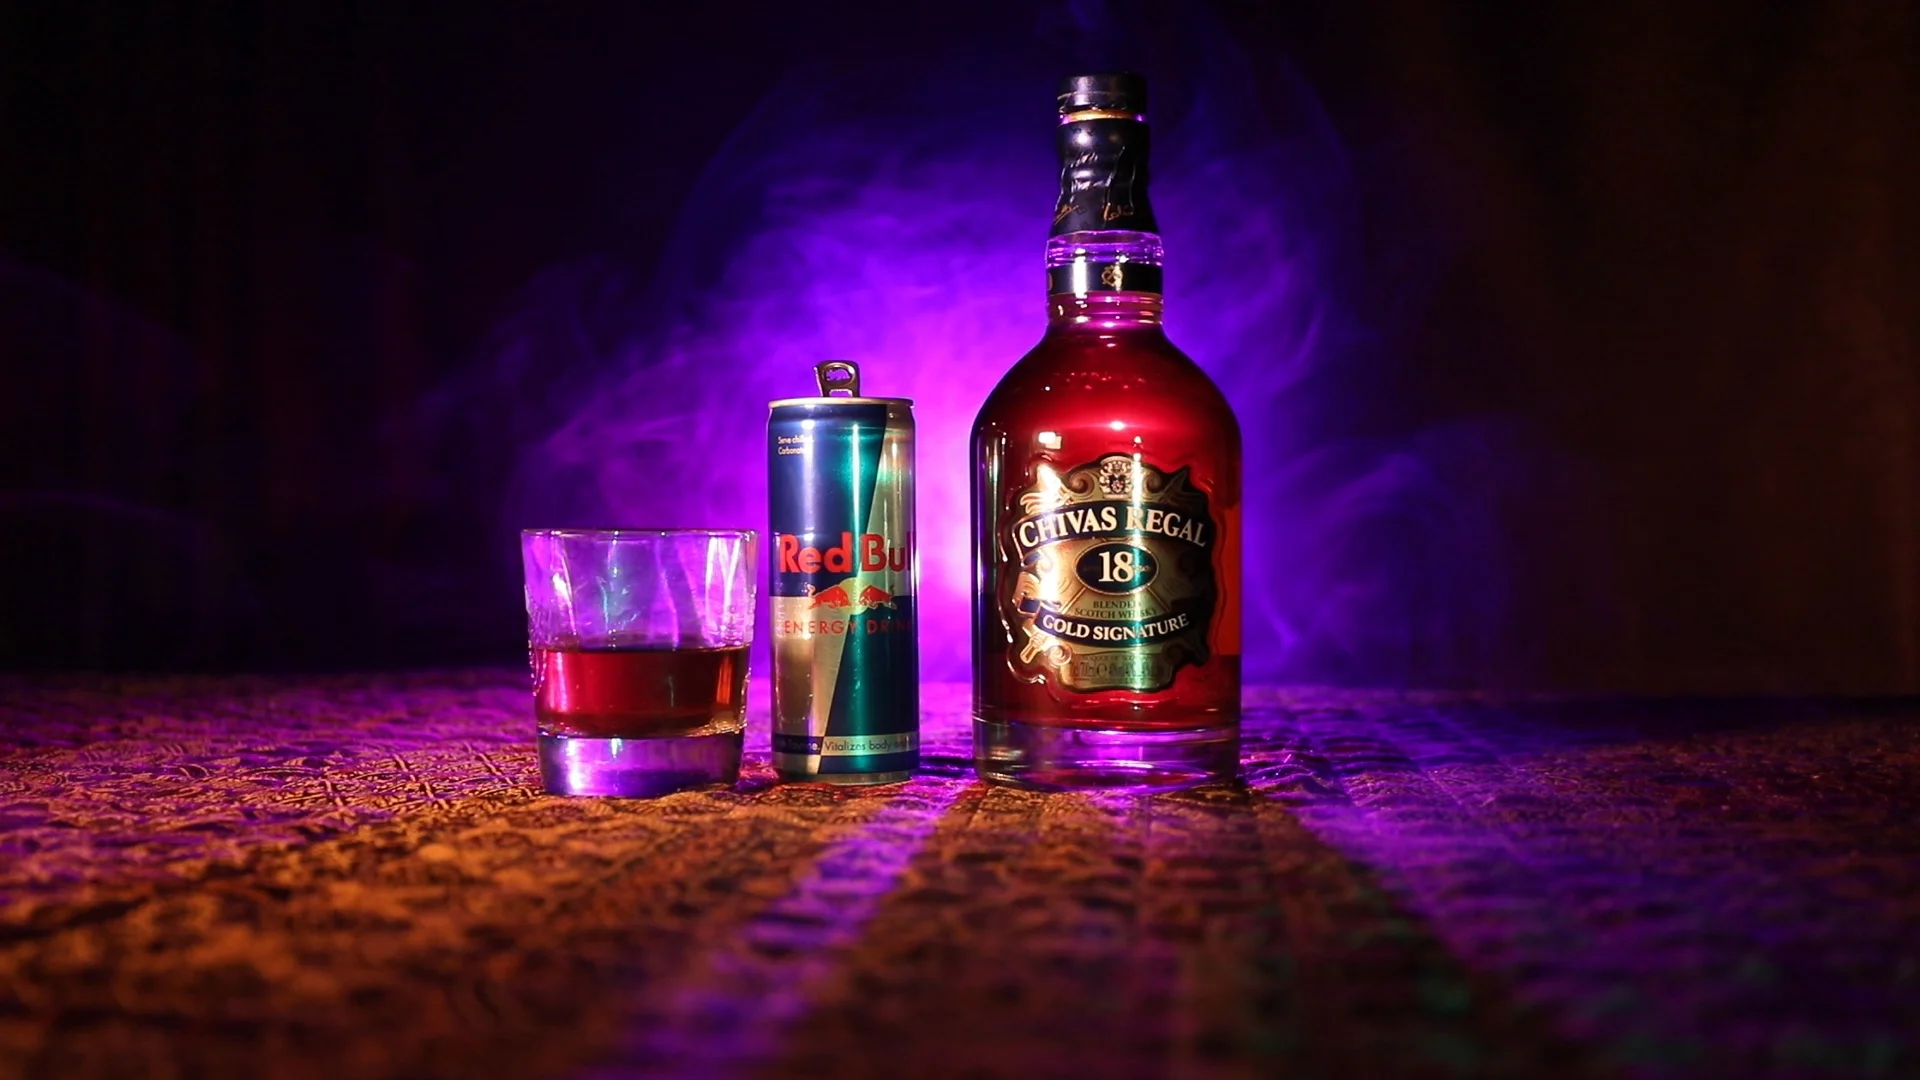 Bottle Of Chivas Regal 18 And Redbull Can Hi Res 87640591